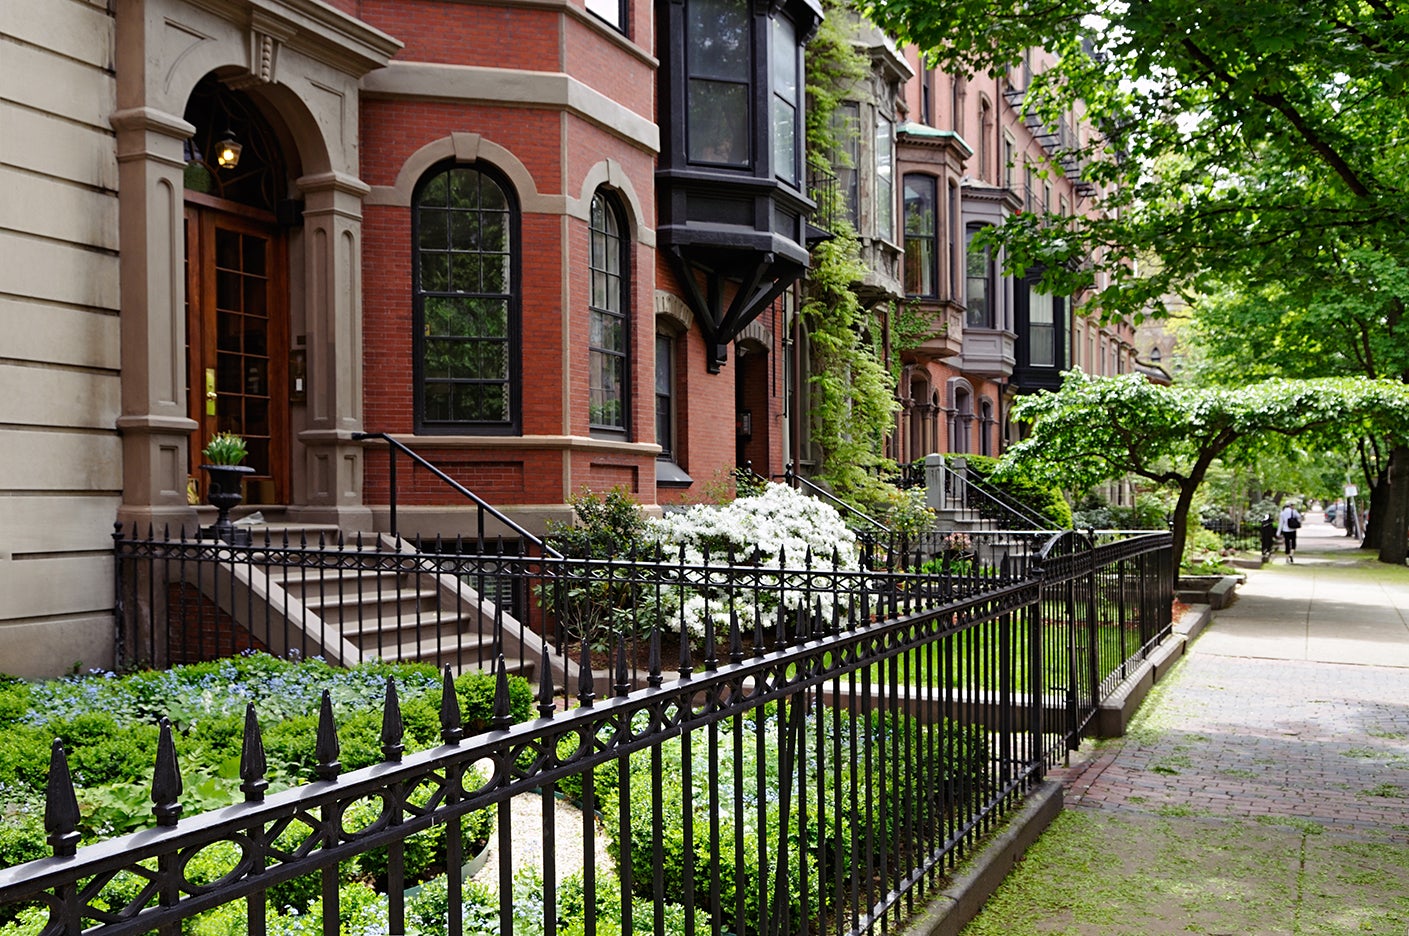 5 of the Happiest American Cities Are Full of Crazy Rent Deals (for Now)